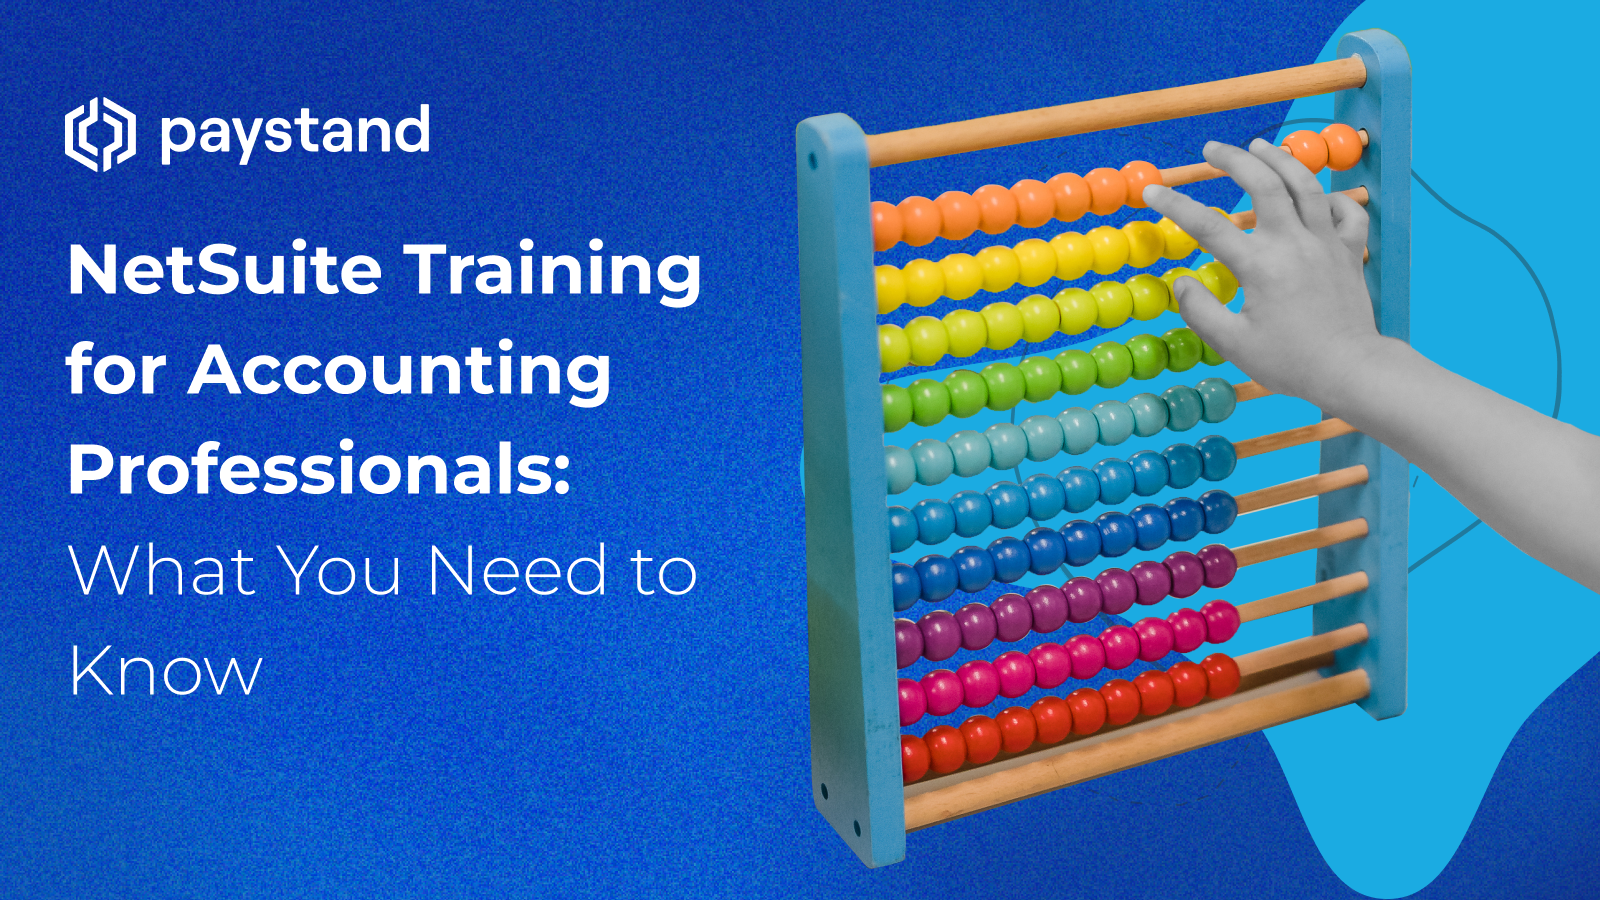 NetSuite Training for Accounting Professionals: What You Need to Know